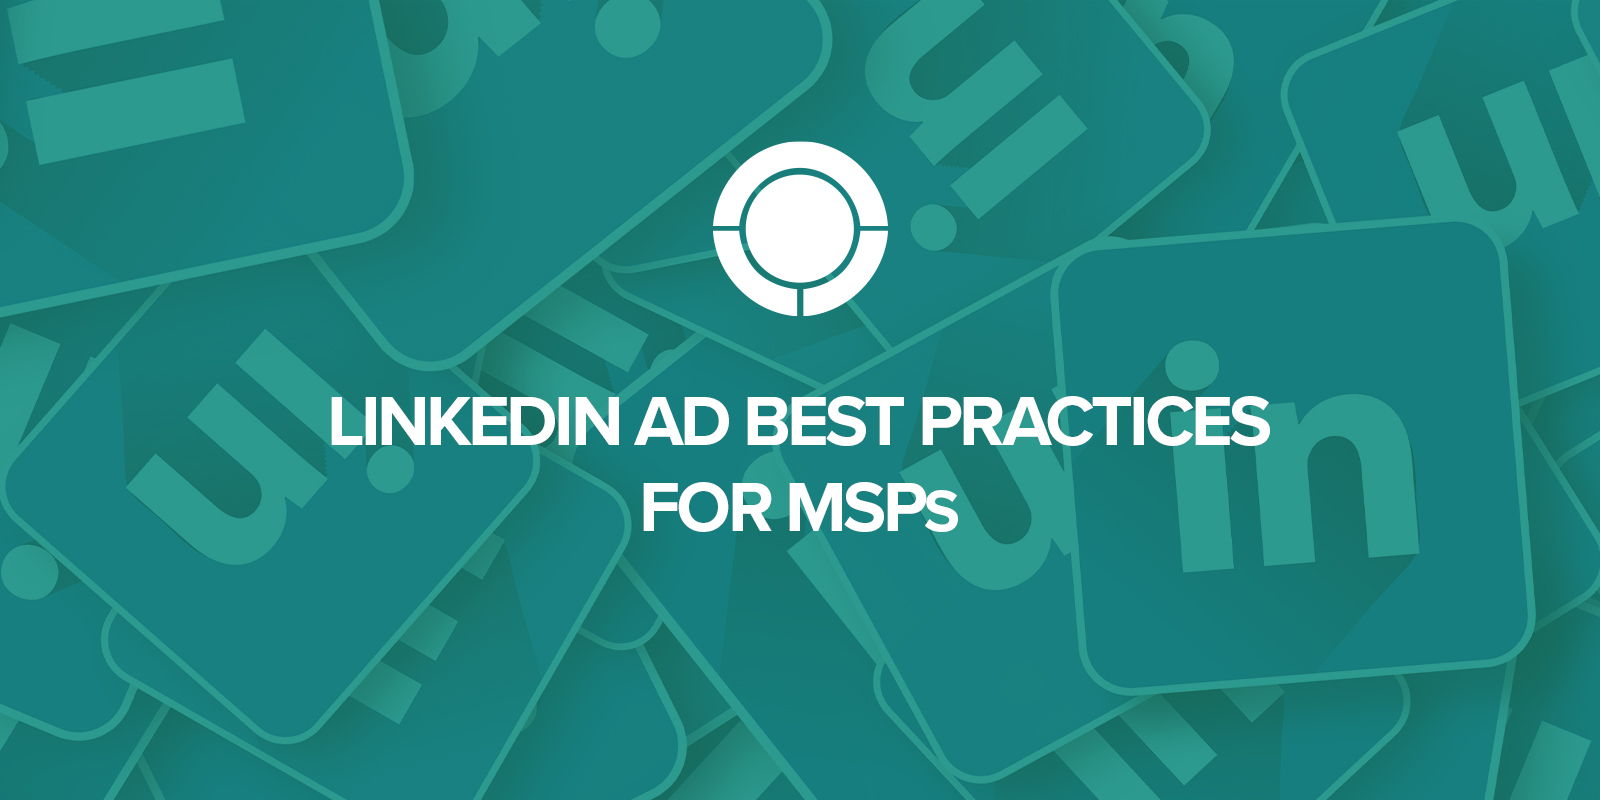 LinkedIn Ad Best Practices for MSPs